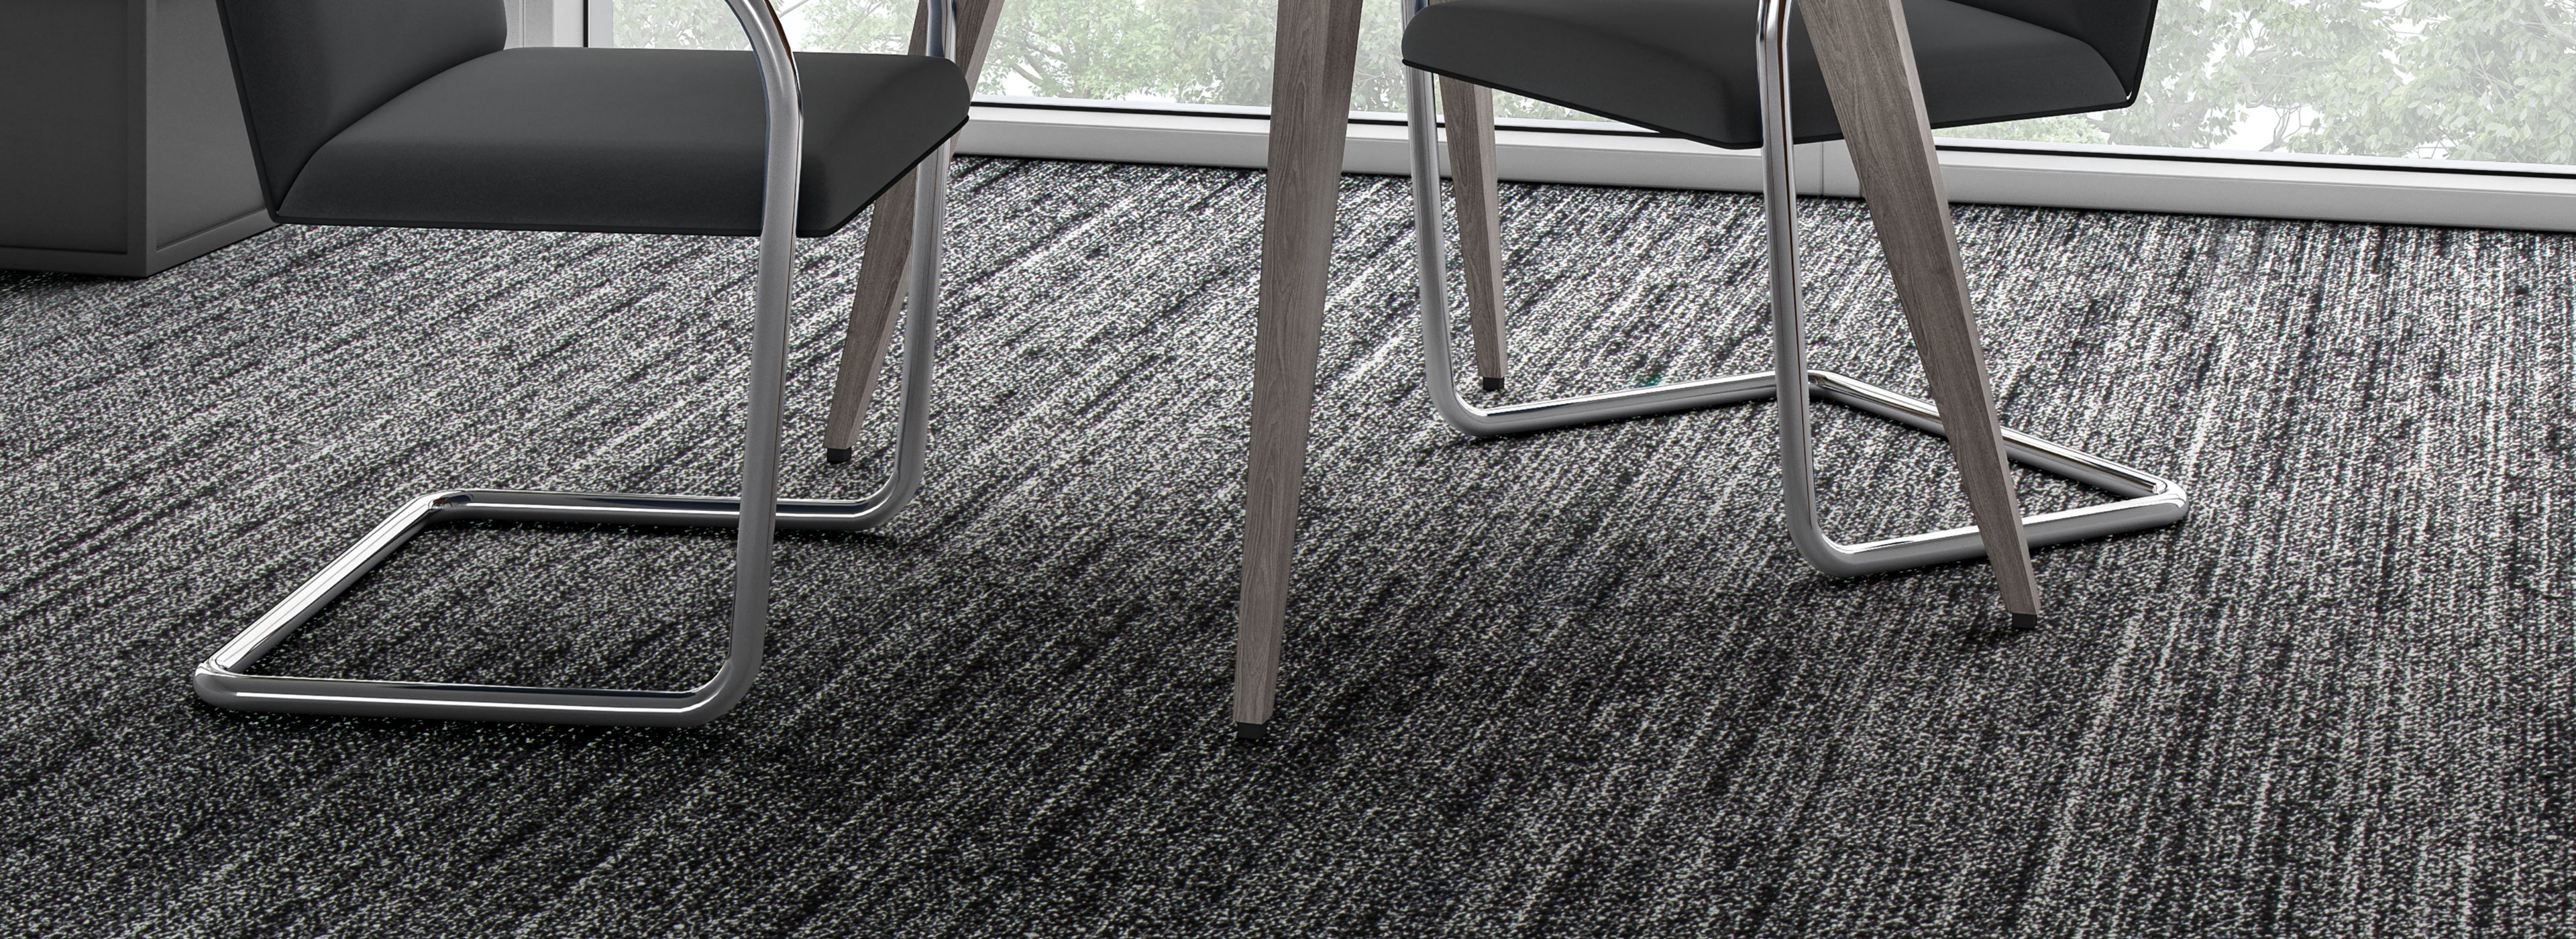 Interface WW870 plank carpet tile shown with small table and chairs afbeeldingnummer 1